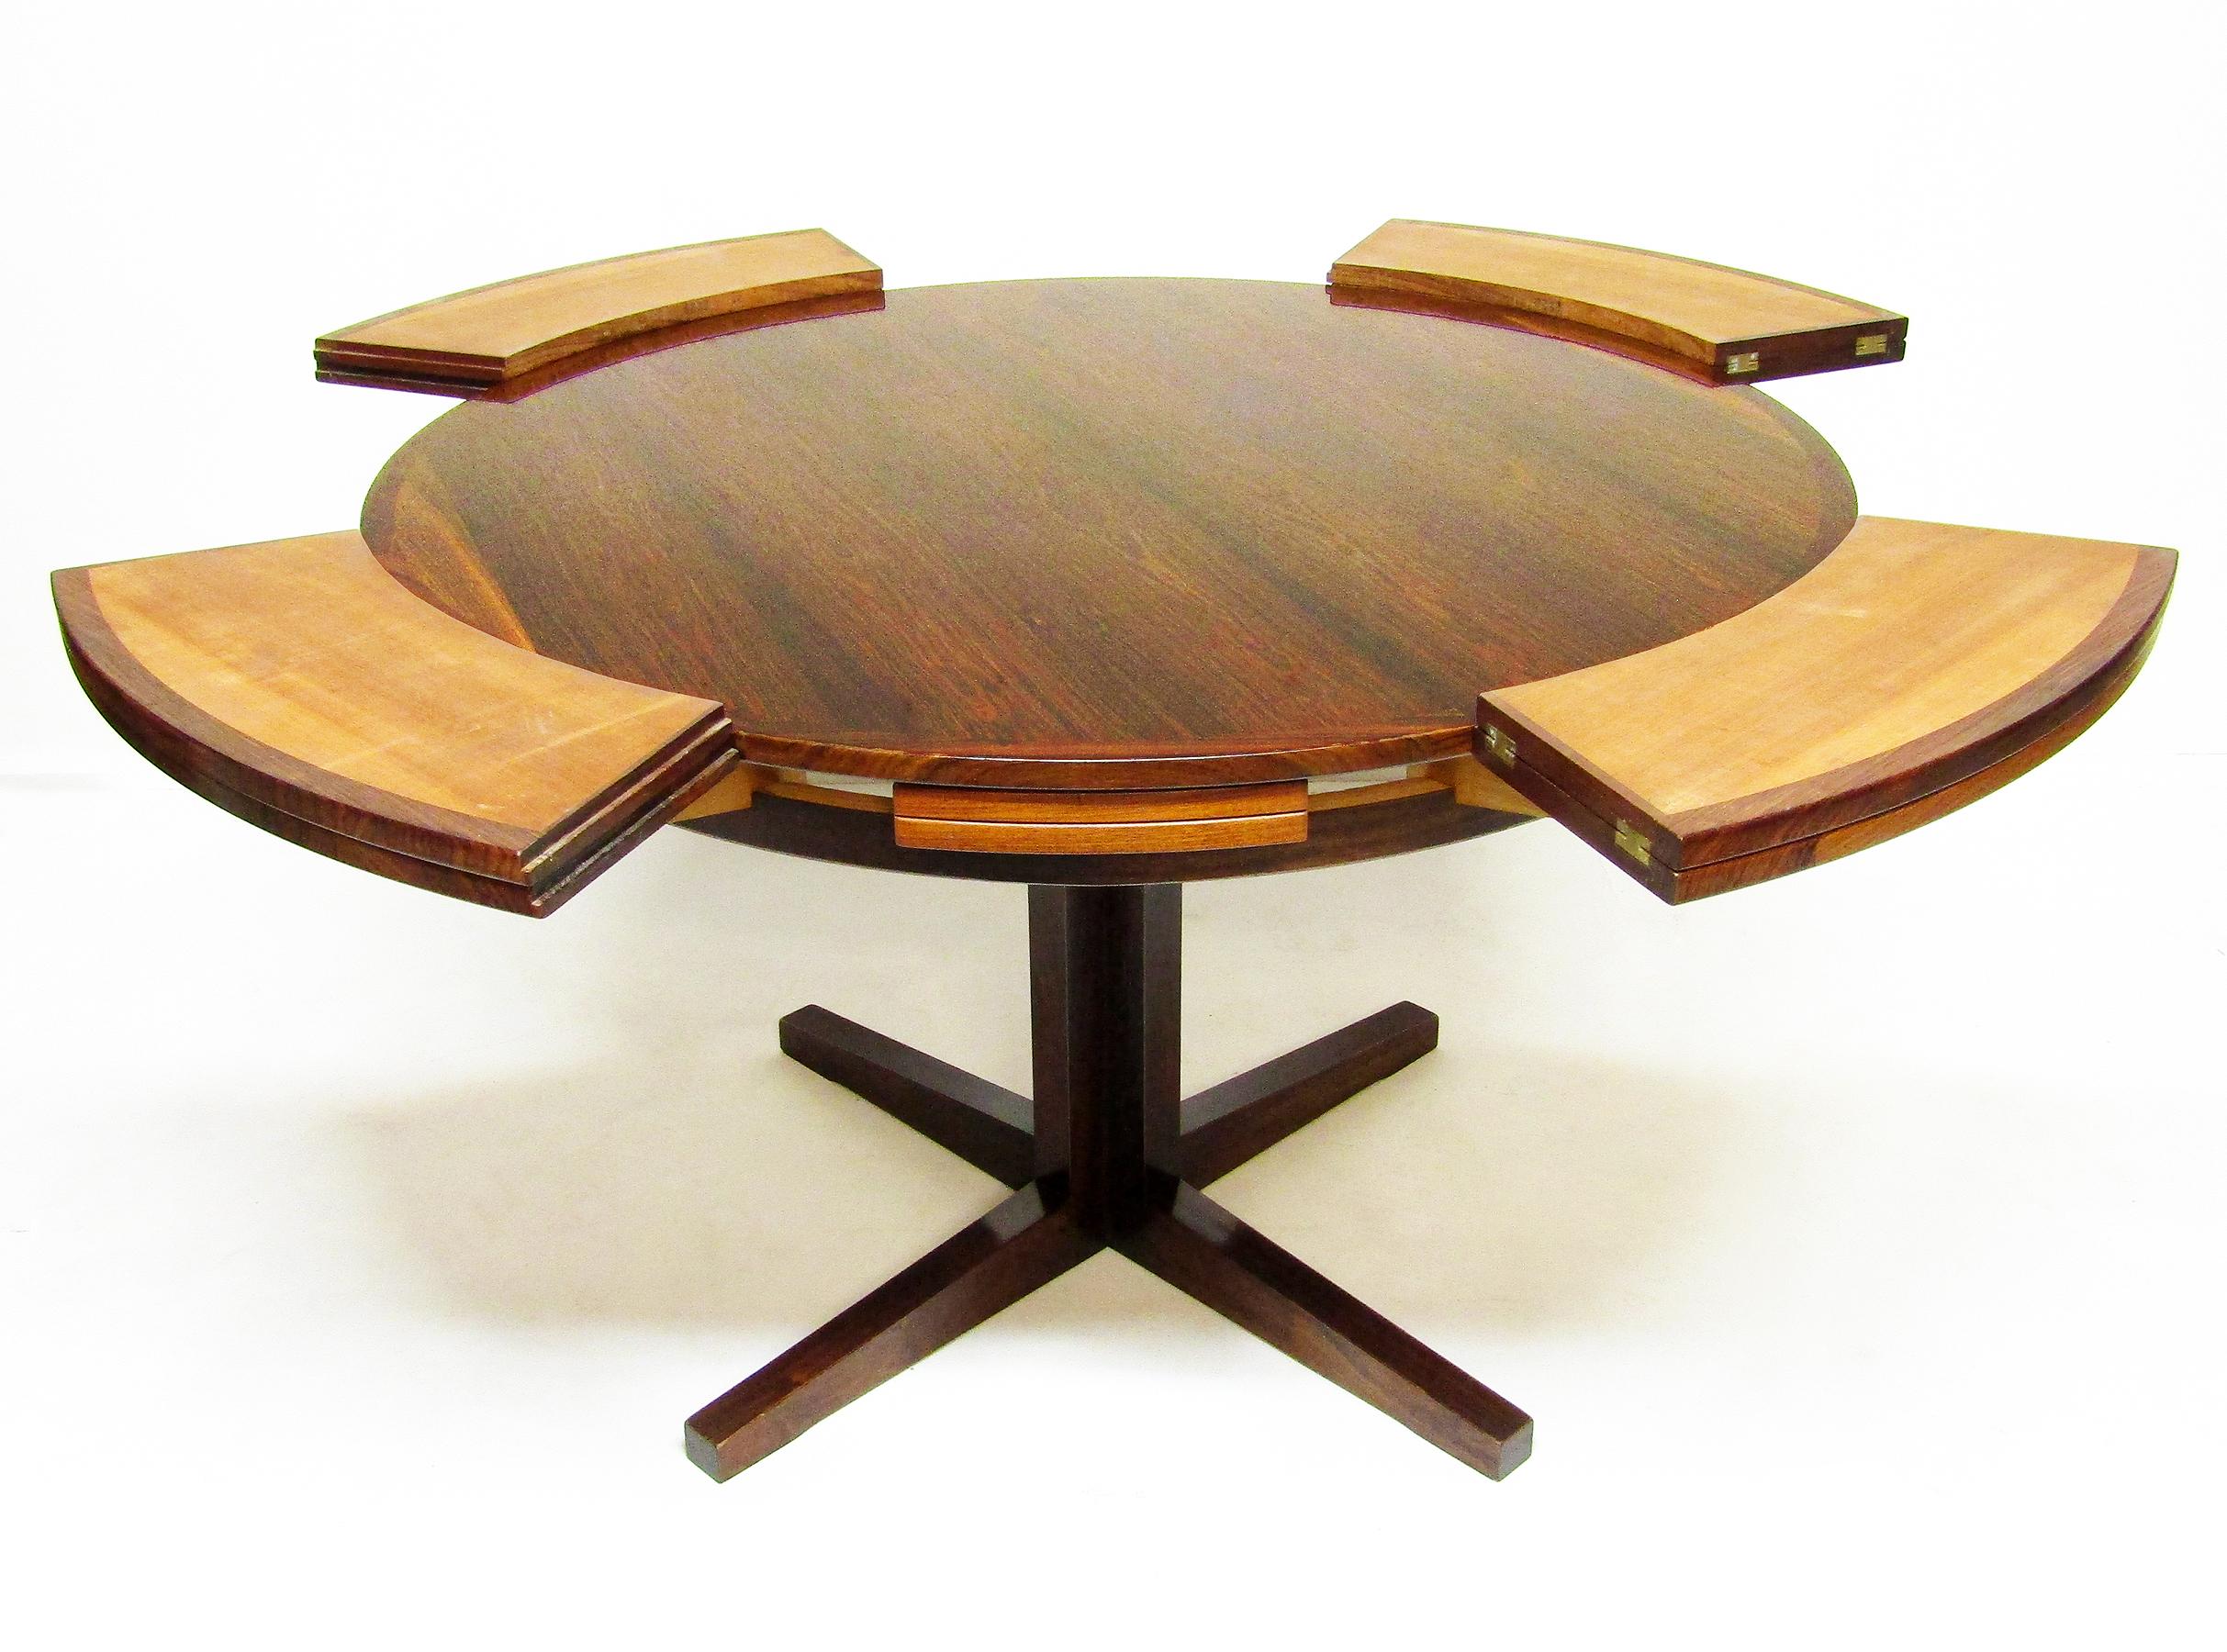 20th Century Danish Rosewood Circular Lotus / Flip Flap Extending Dining Table By Dyrlund For Sale